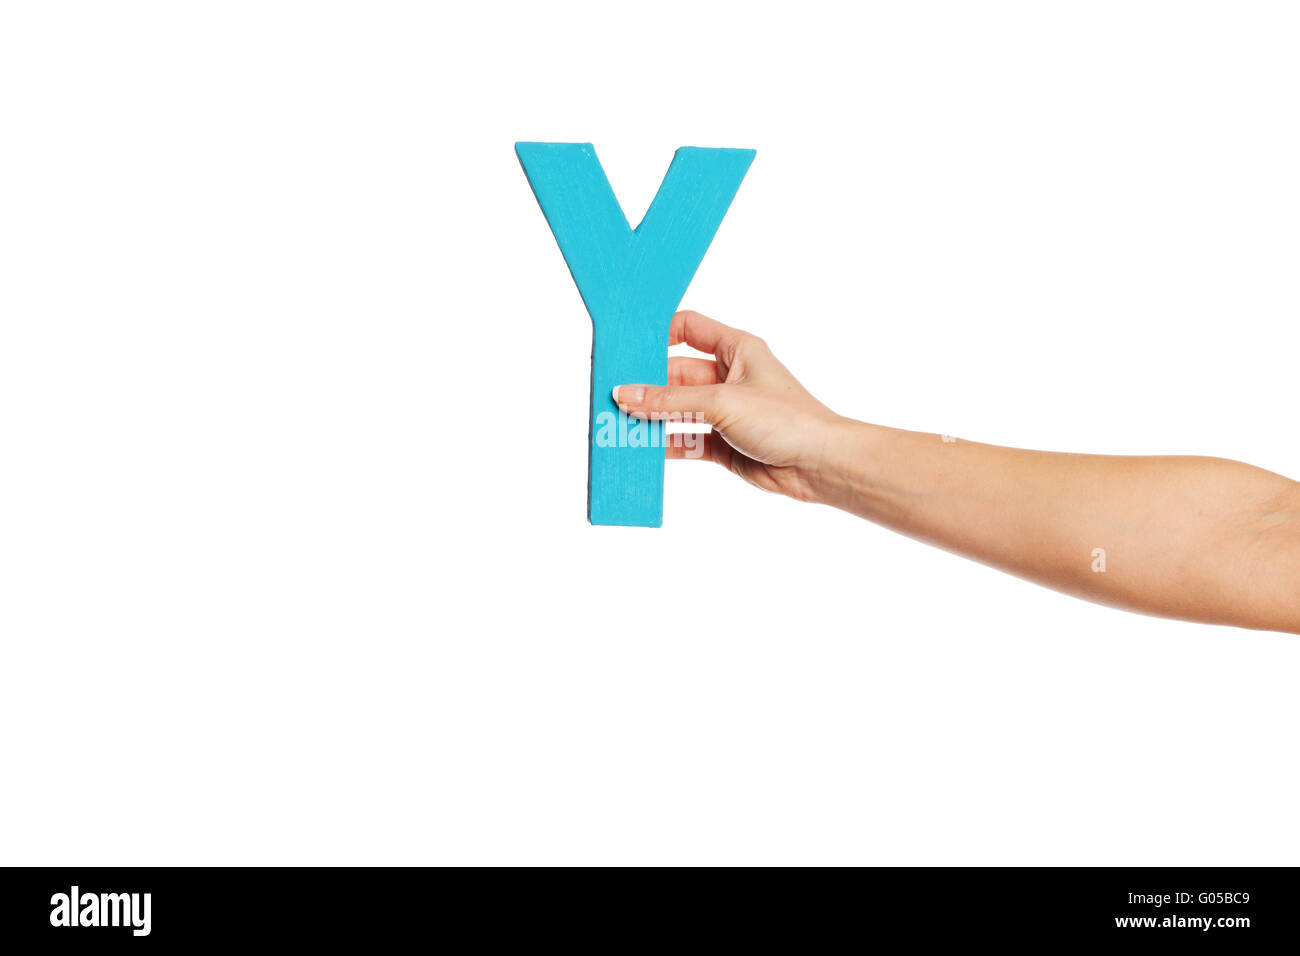 hand holding up the letter Y from the right Stock Photo